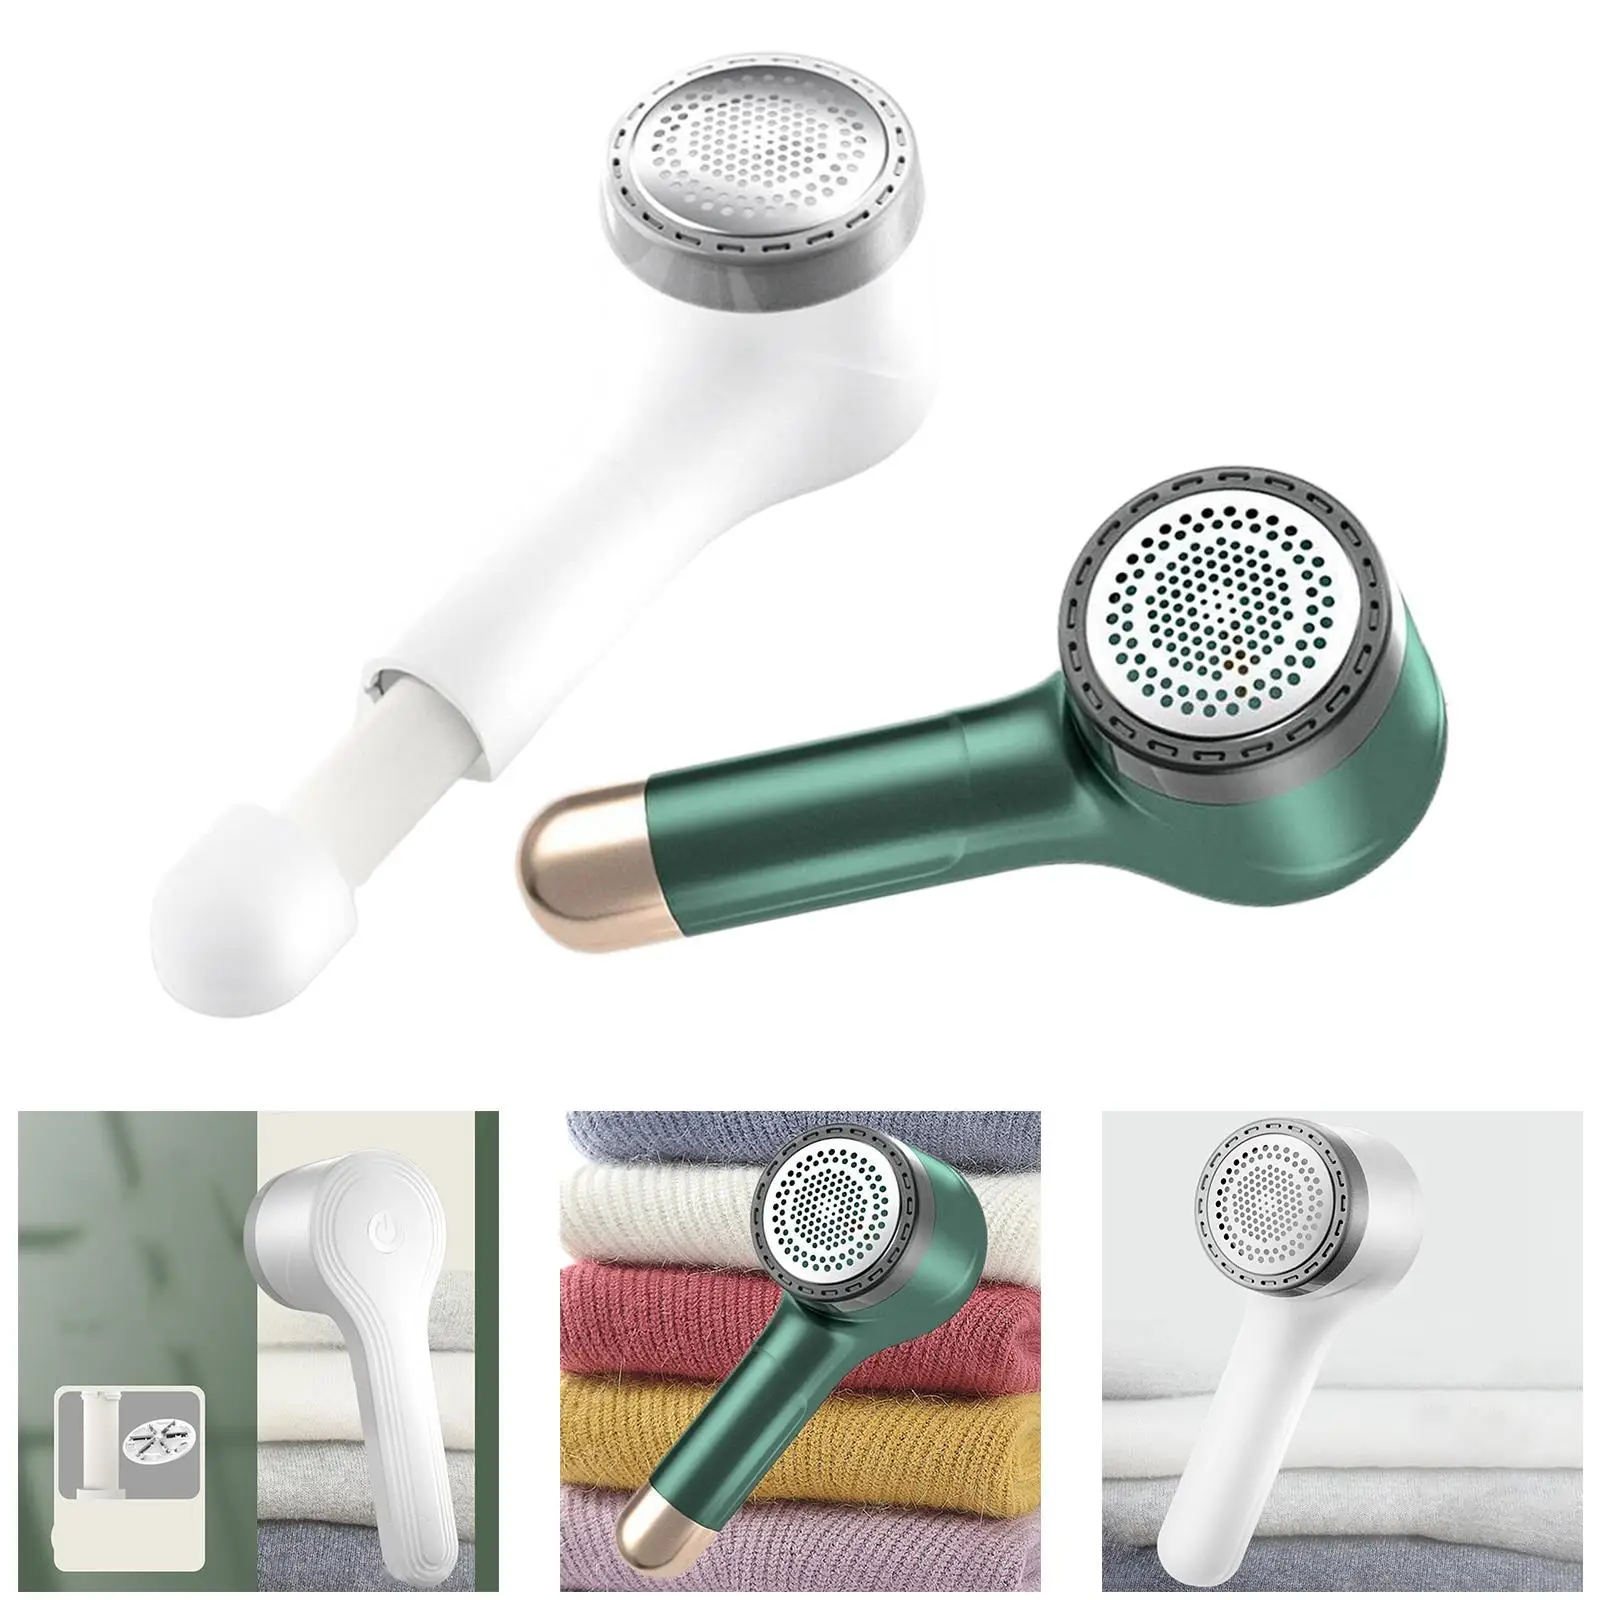 Rechargeable Lint Remover Removal Tool Remove One Button Start Travel Cleaning Trimmer Sweater Shaver for Wool Clothing Cotton